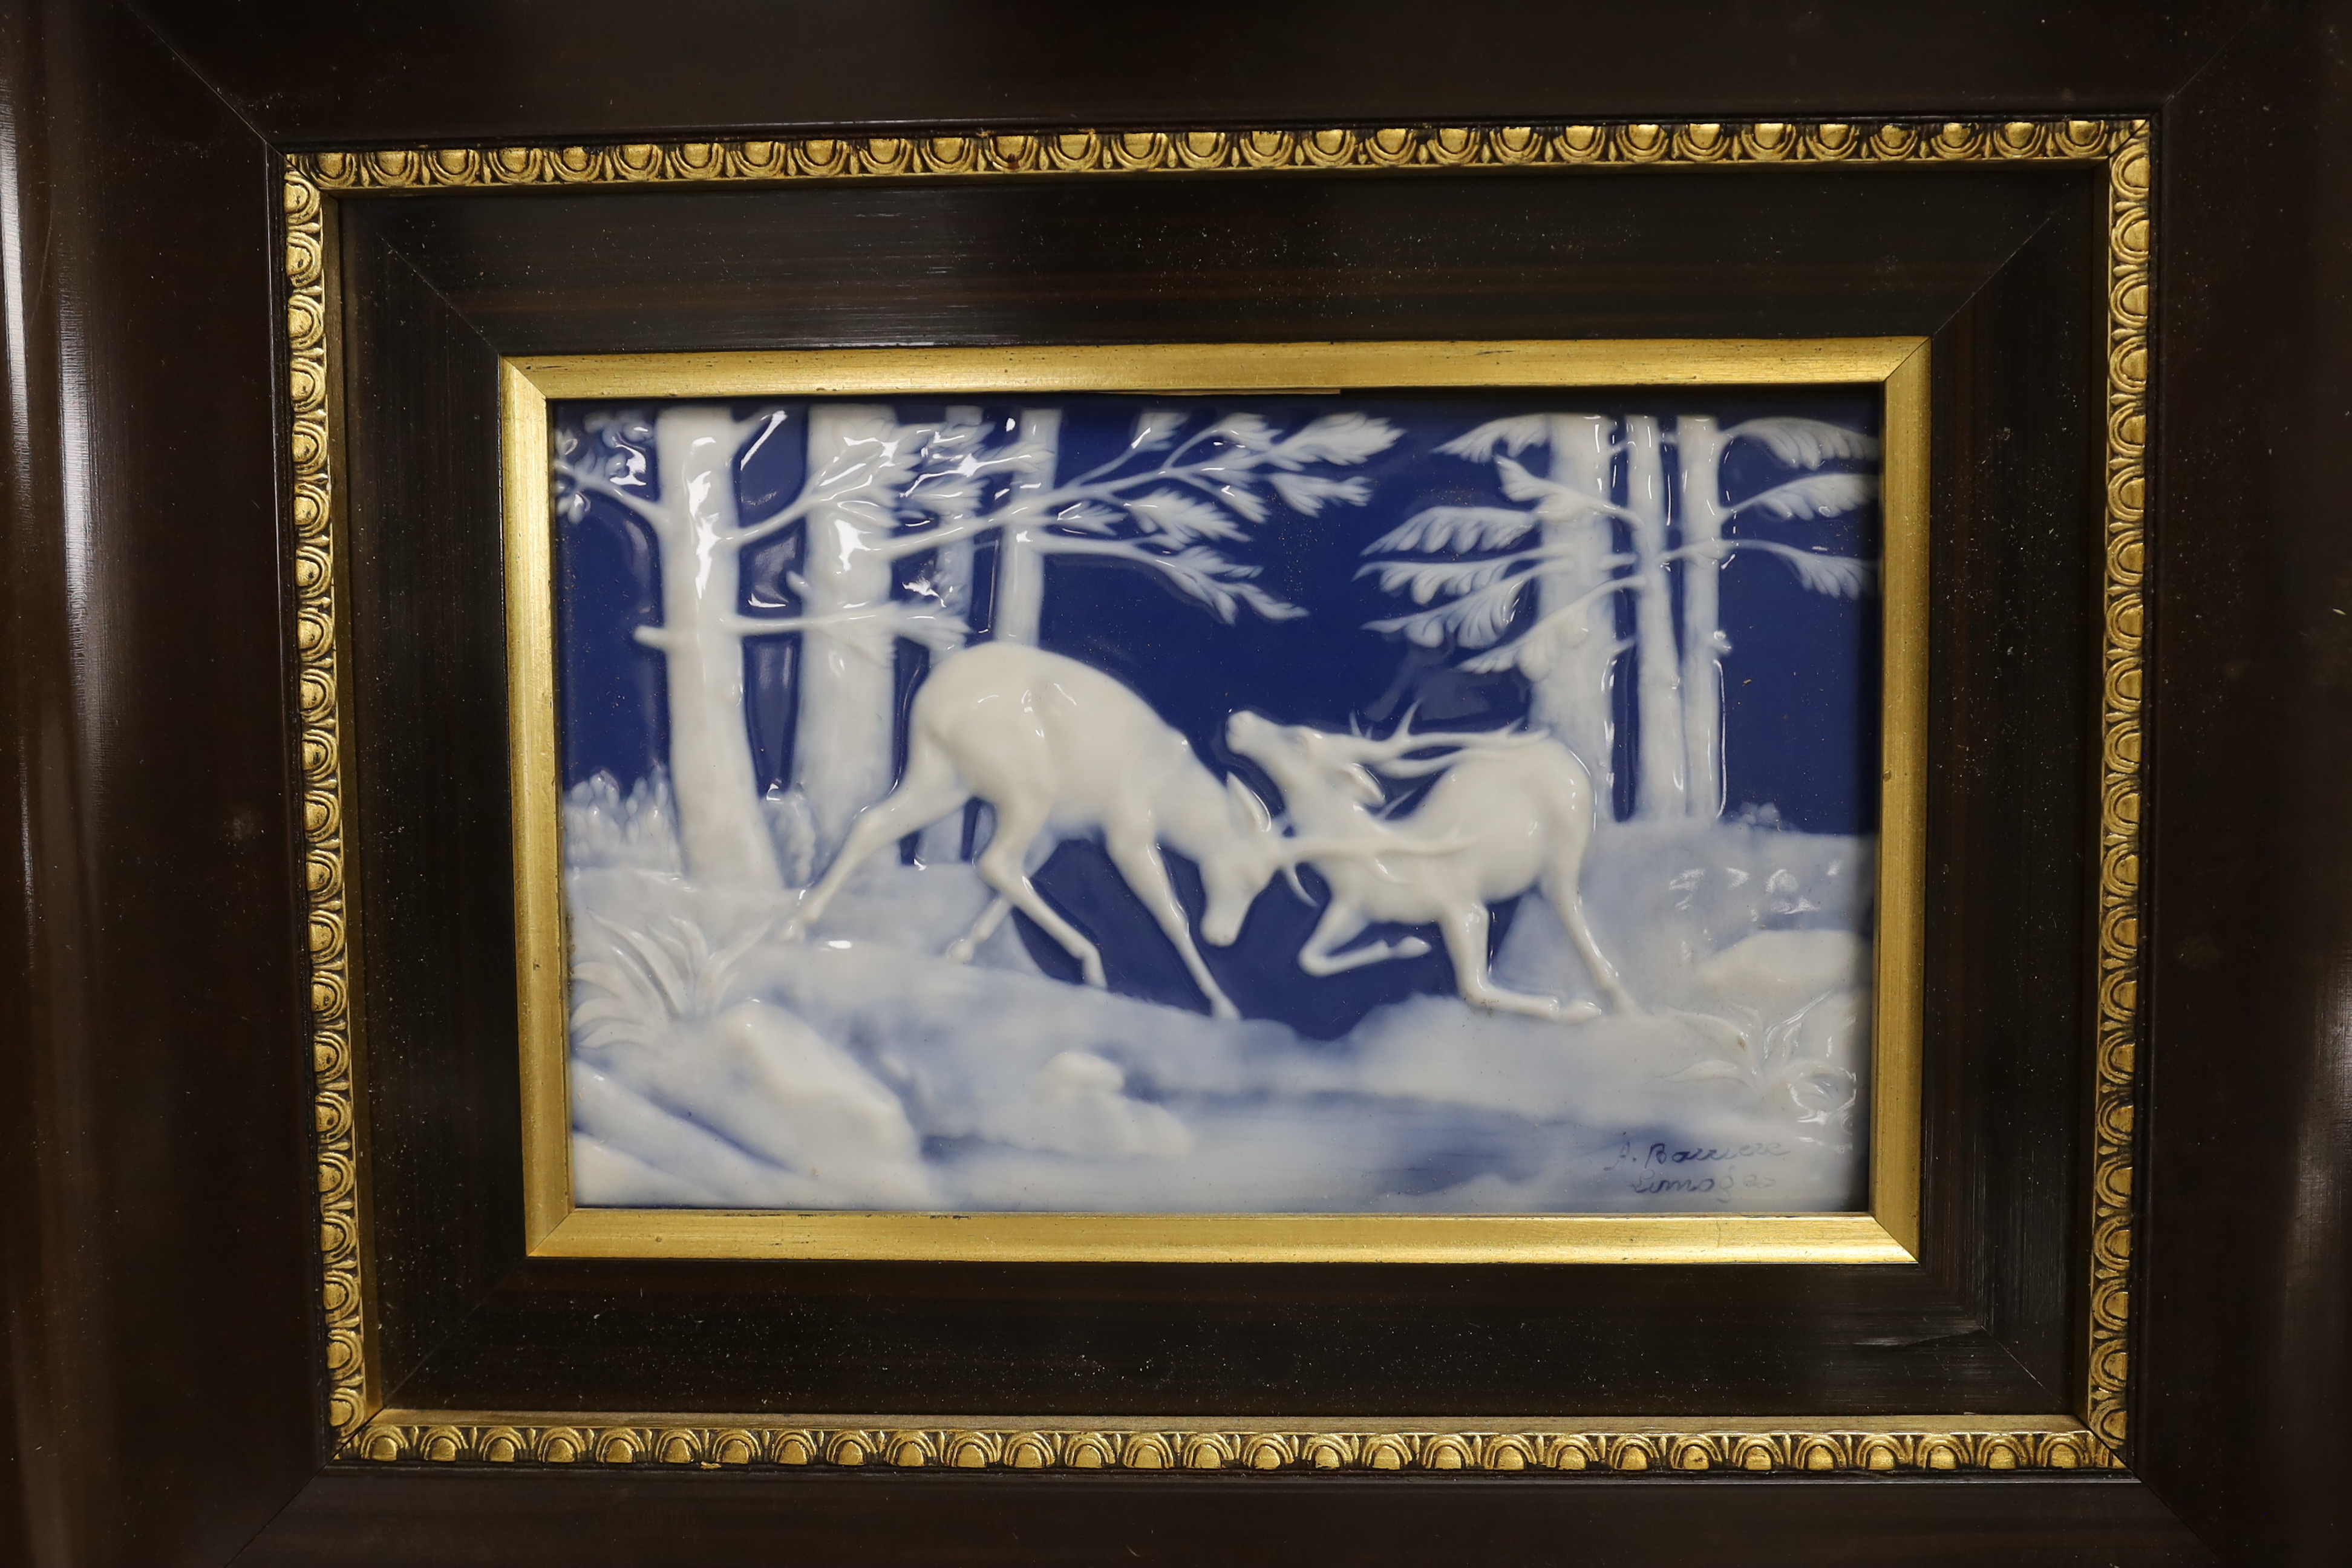 A framed Limoges Pate Sur Pate plaque depicting stags fighting, signed Barriere, 34 x 42cm including frame